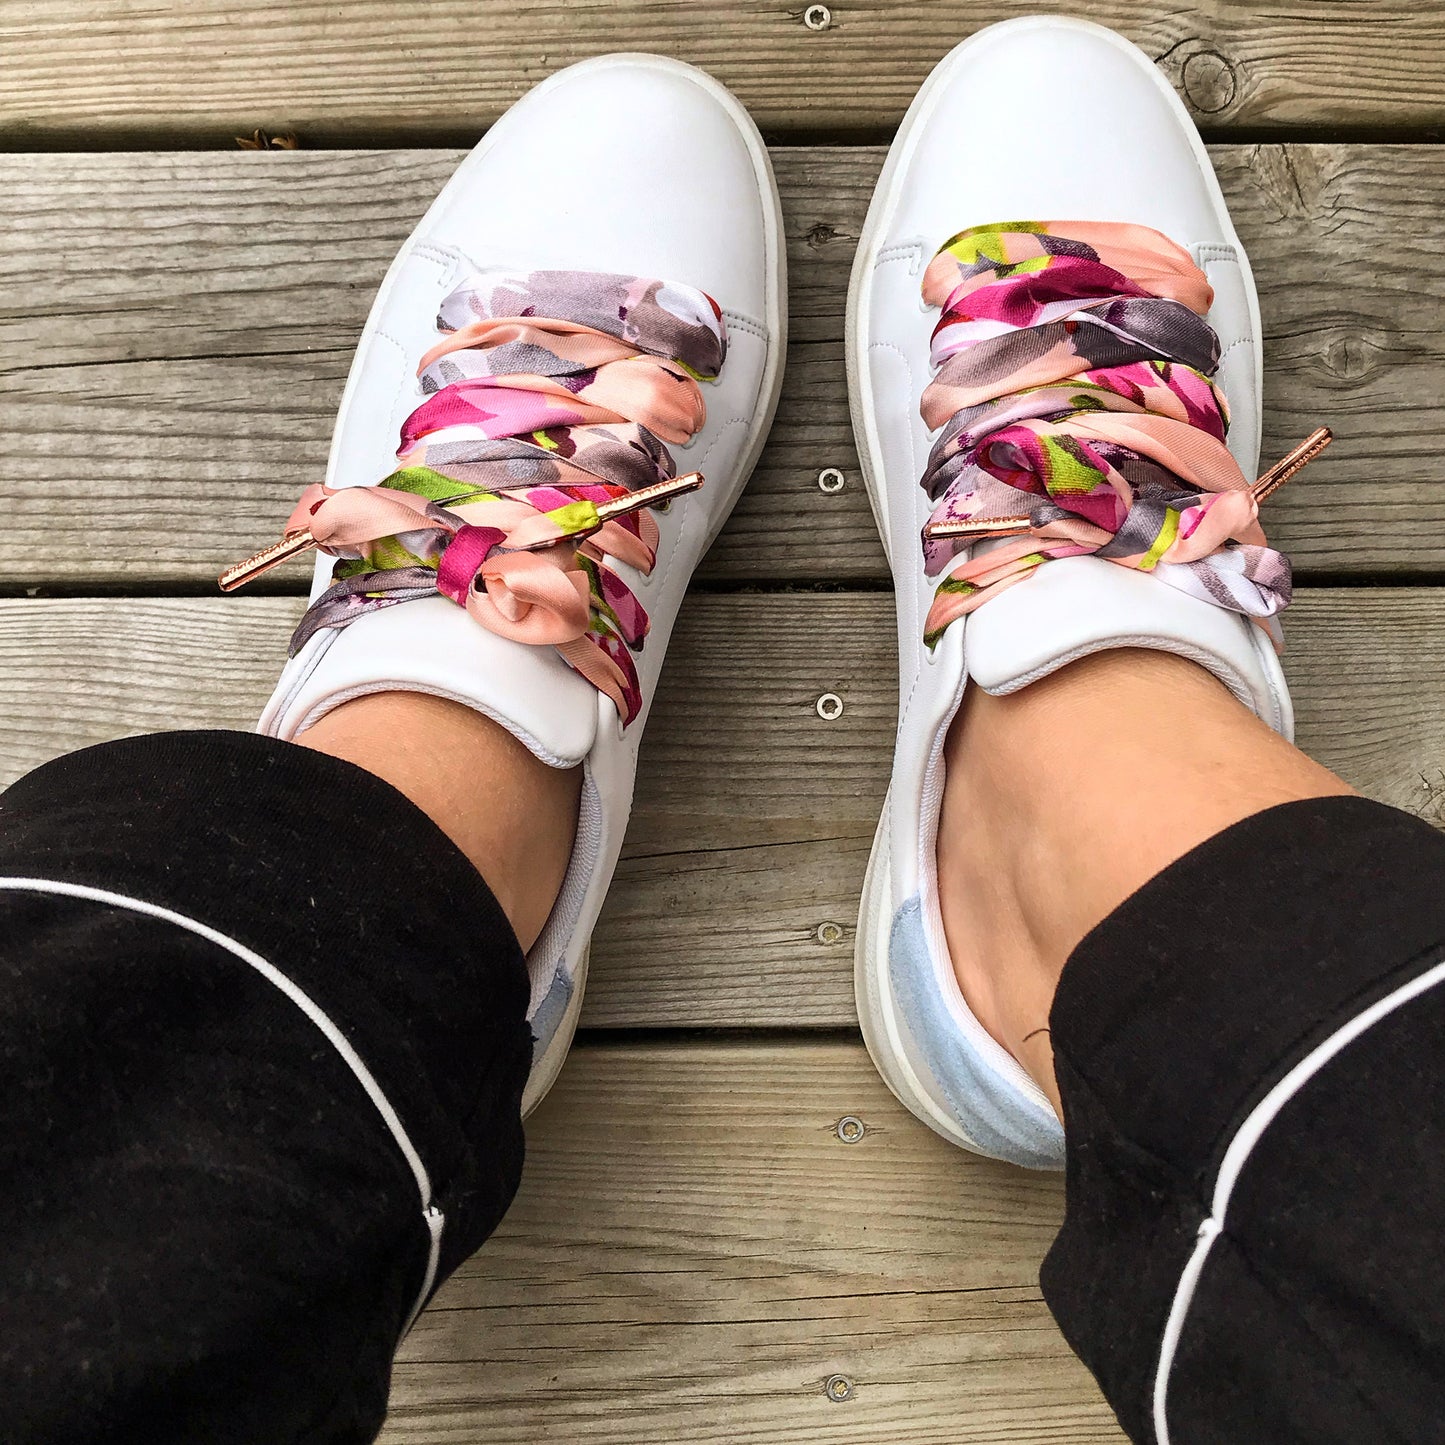 Rose scarf shoelaces with flowers - The Shoelace Brand